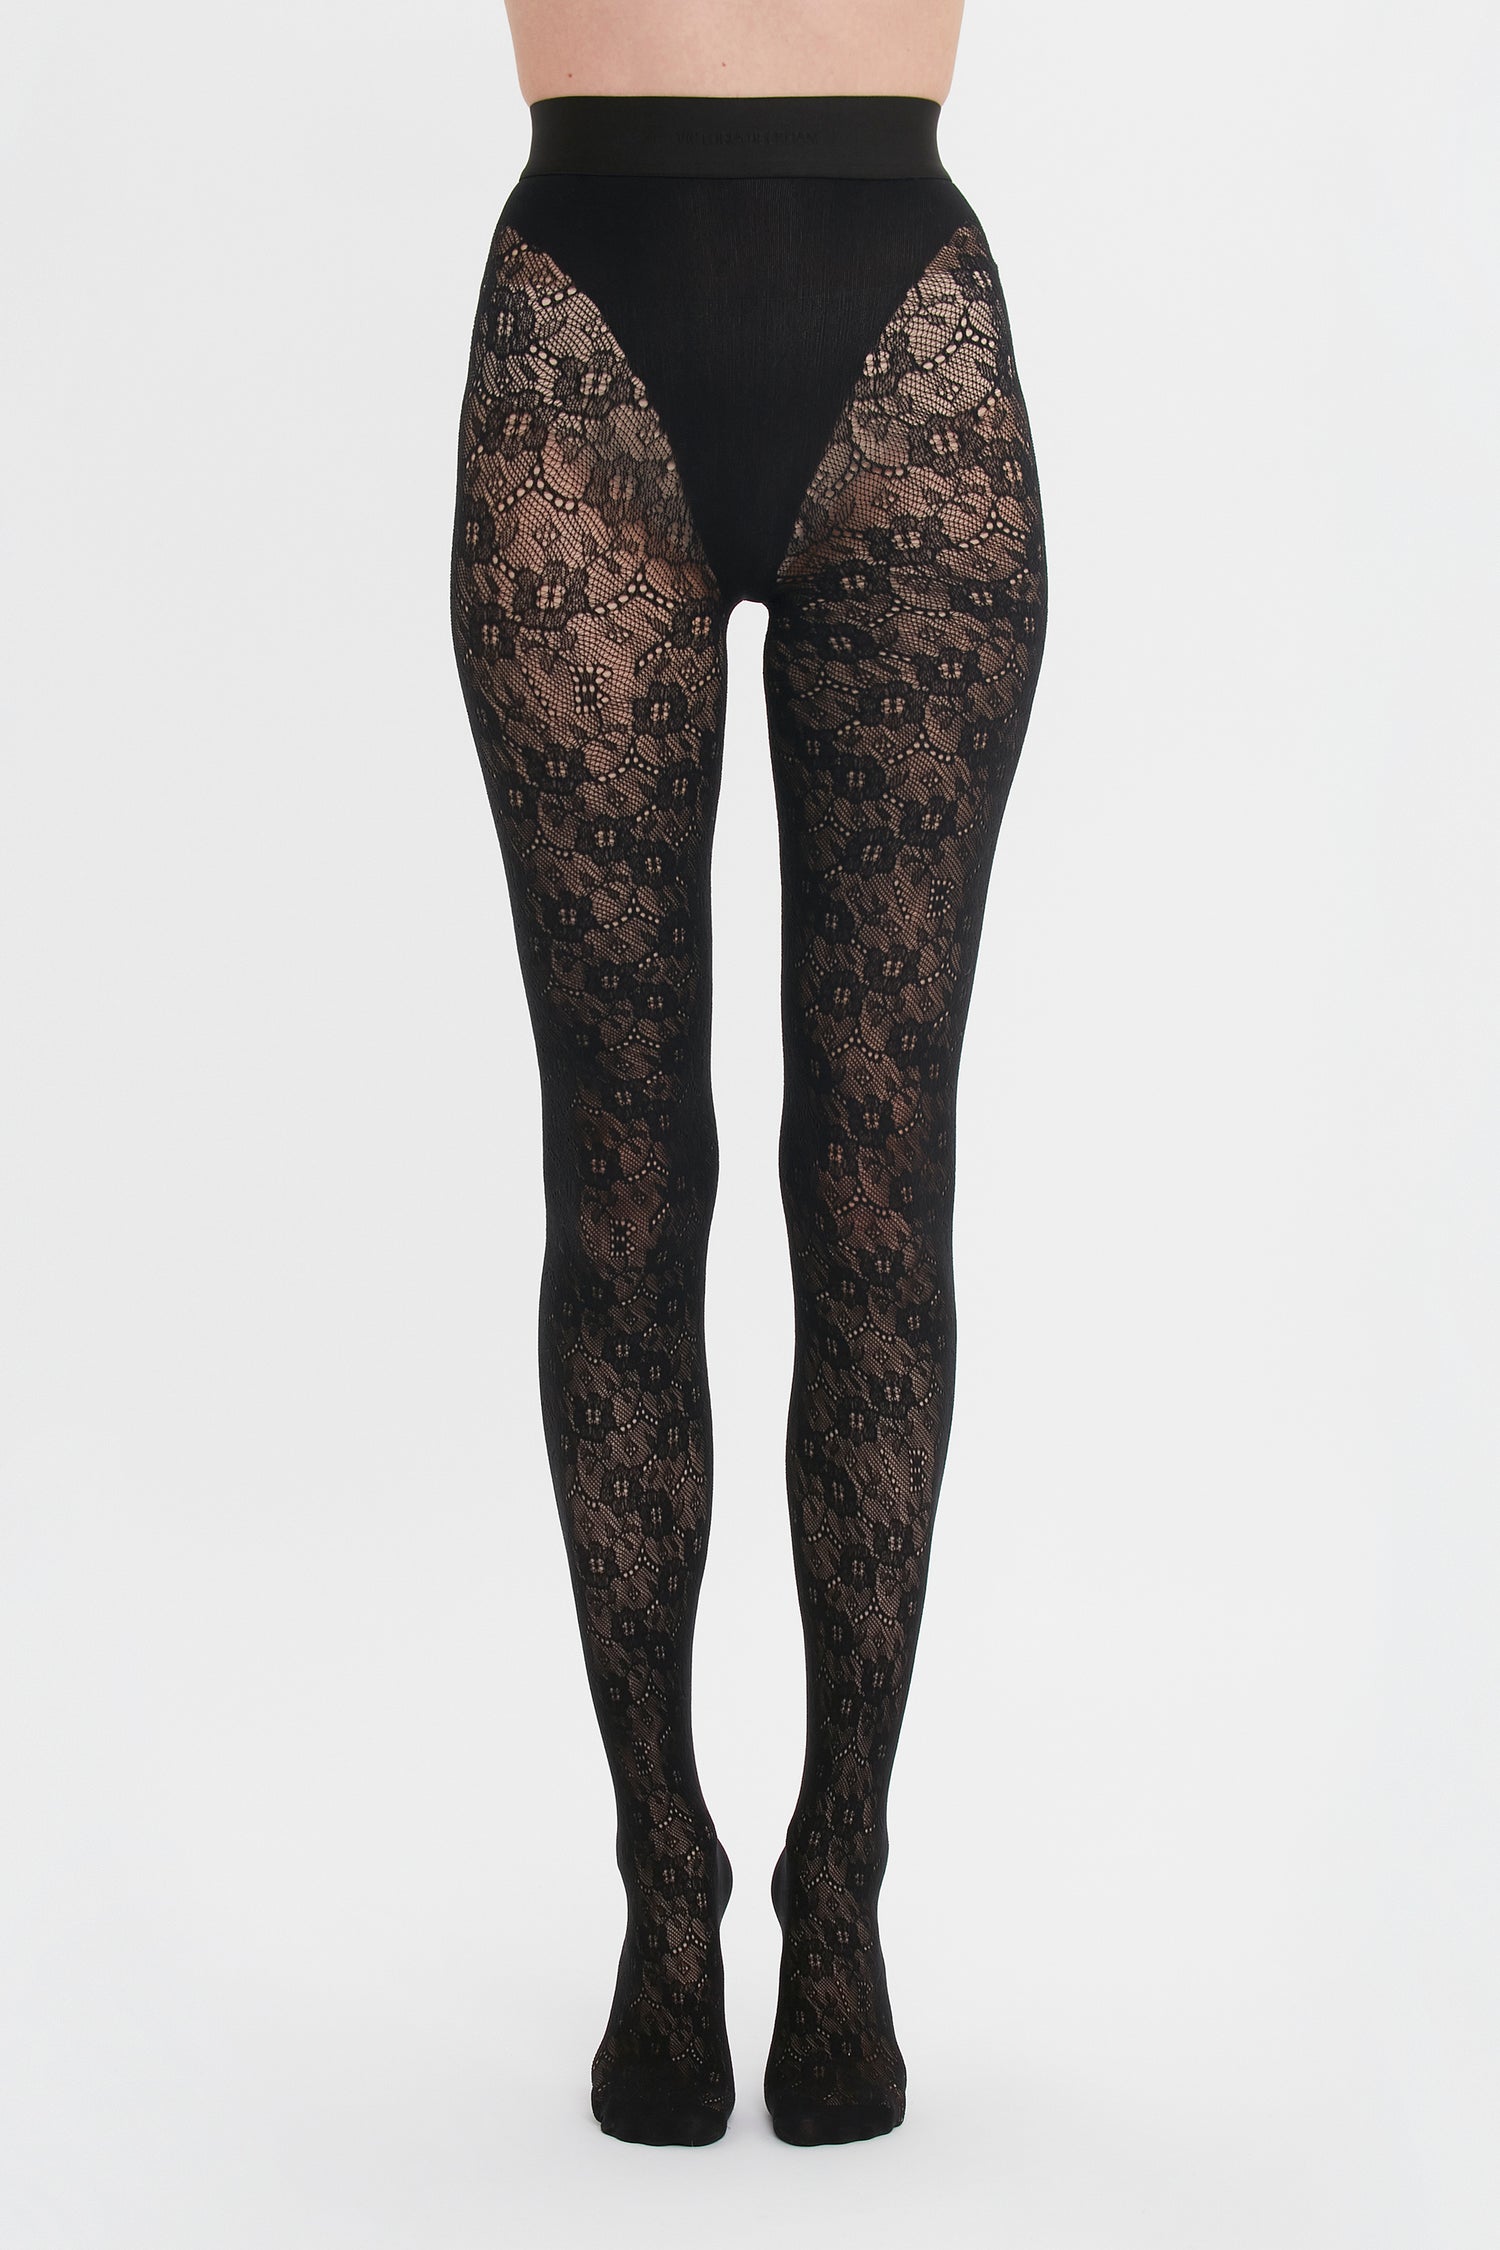 A person wearing decorative Victoria Beckham Exclusive VB Monogram Lace Tights In Black against a white background.